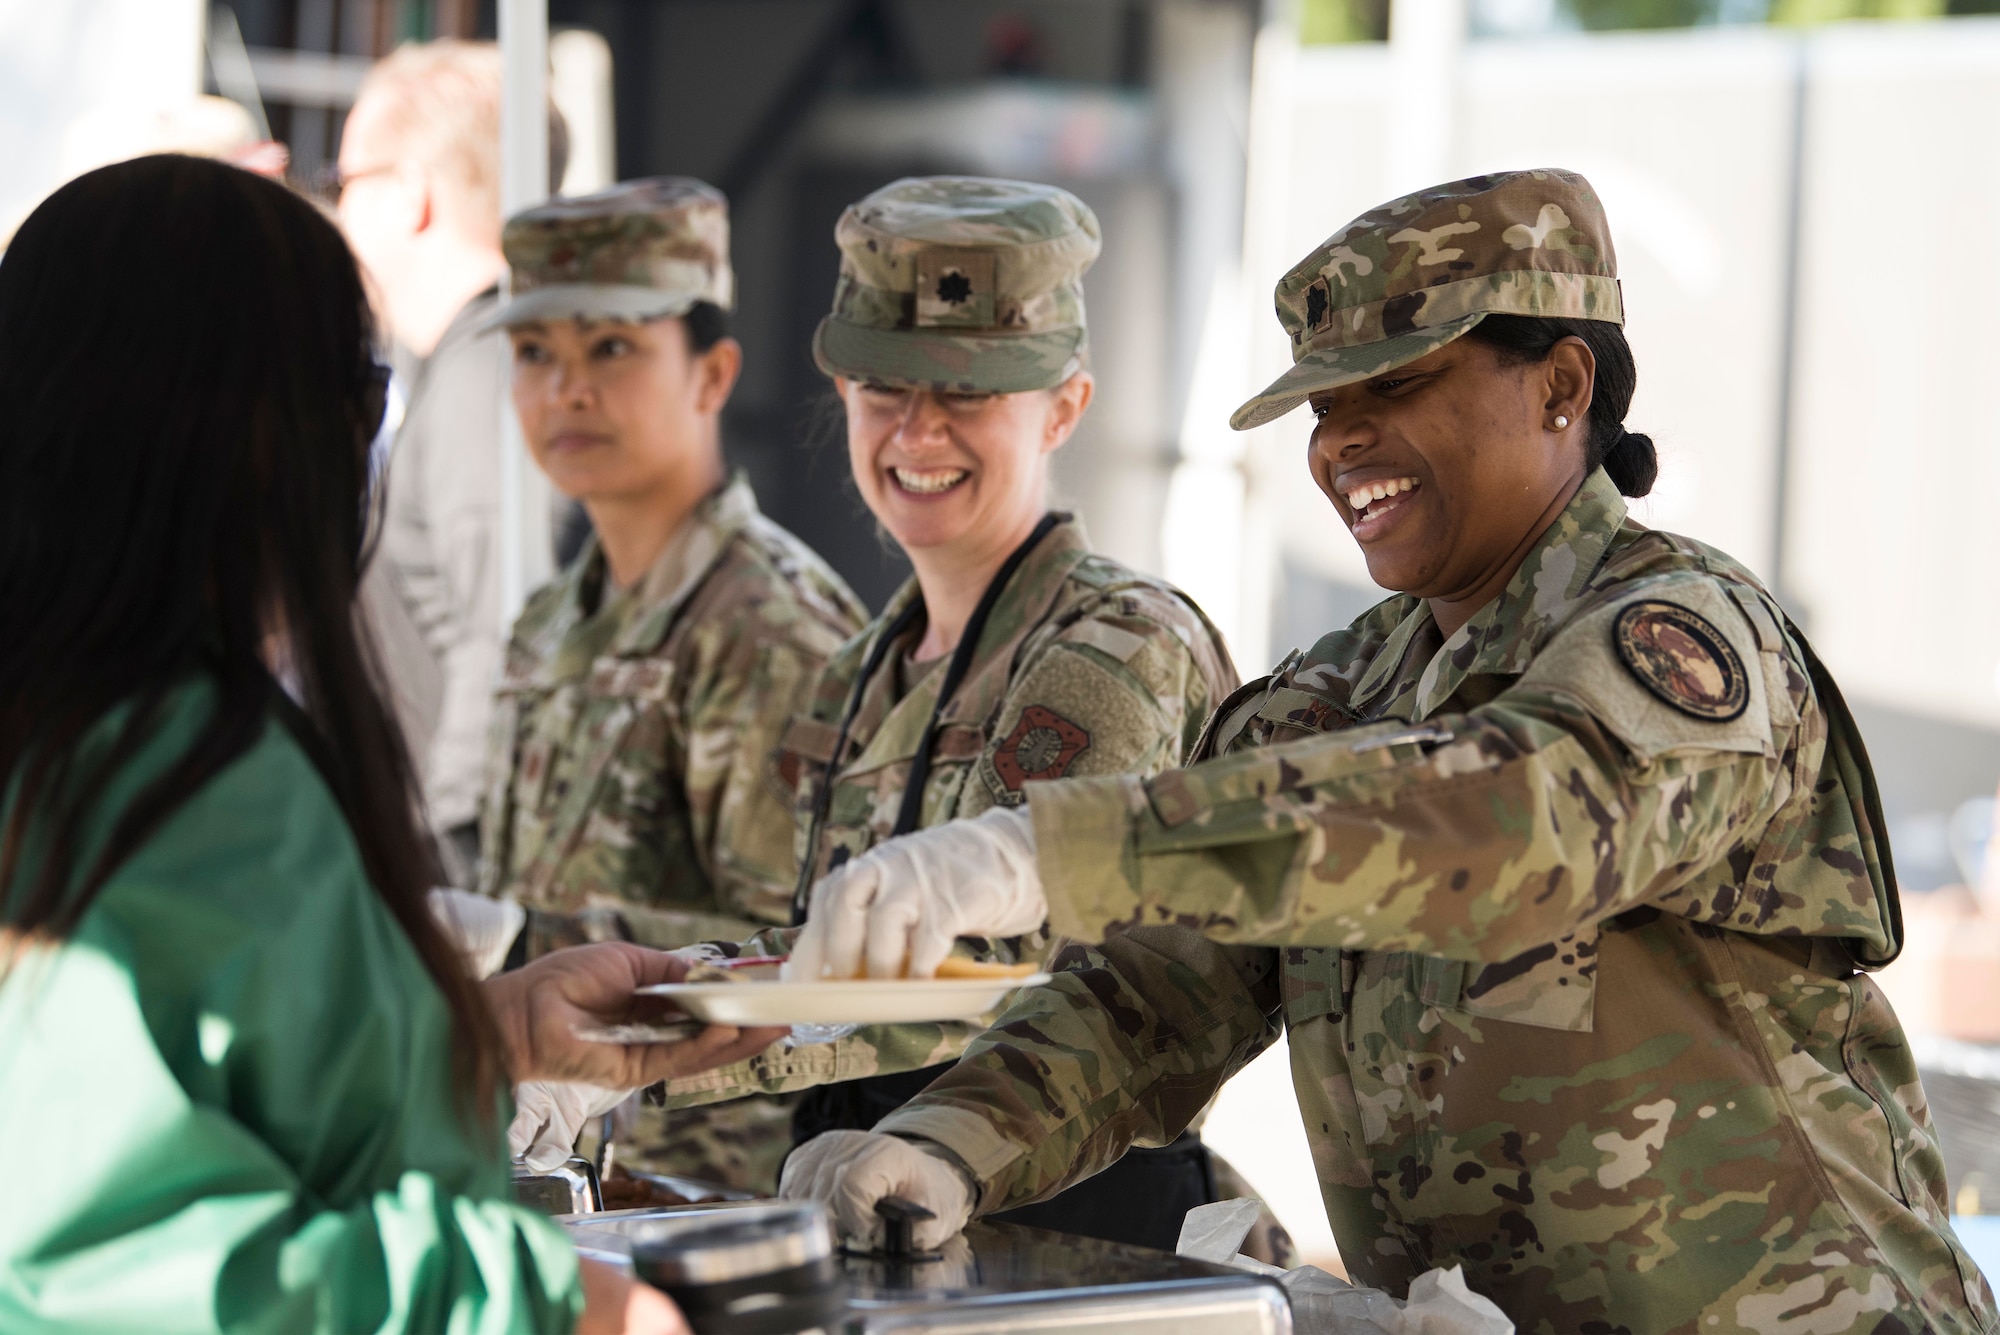 Vandenberg Air Force Base members serve breakfast during the 2019 Santa Barbara County Veteran Stand Down event Oct. 19, 2019, in Santa Maria, Calif. During the event, Airmen from Vandenberg AFB, Calif., assisted with serving food, carrying items for veterans and providing assistance in the supplies warehouse.(U.S. Air Force photo by Airman 1st Class Hanah Abercrombie)